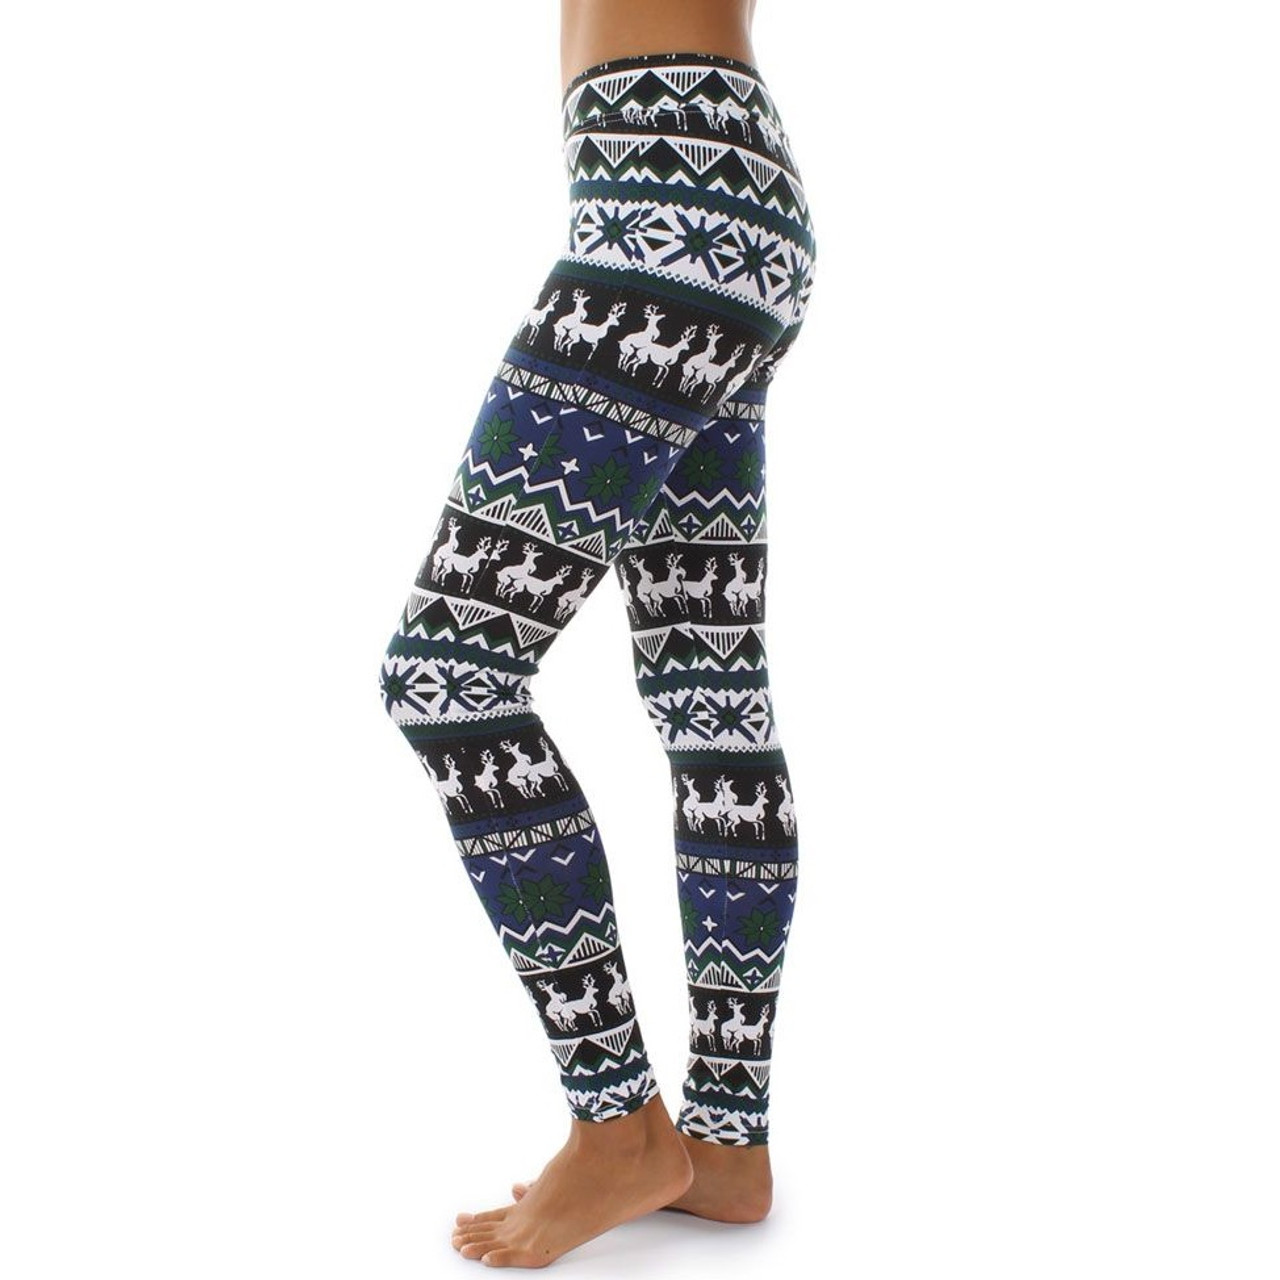 Humping Reindeer Leggings (Blue/Green) by Tipsy Elves - SMALL ONLY